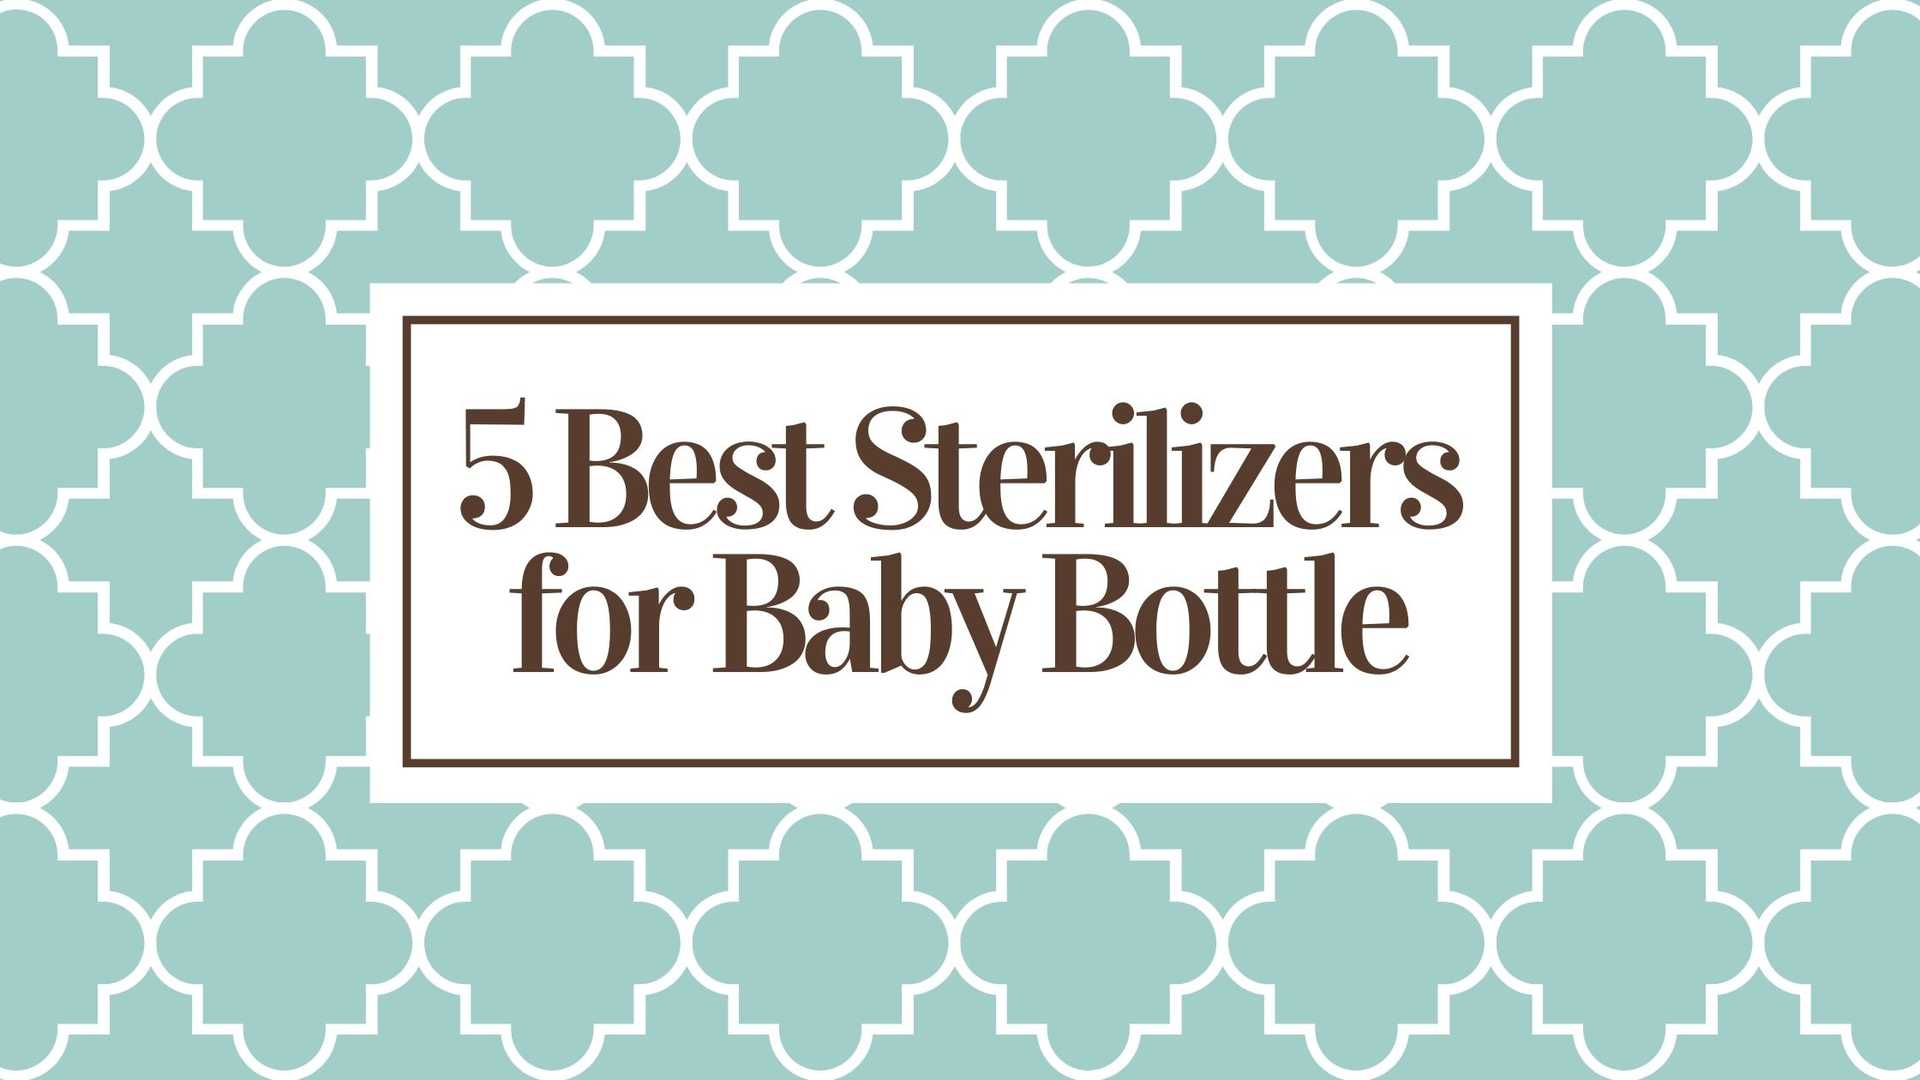 Top 5 Best Sterilizers for Baby Bottle🍼 in 2022 